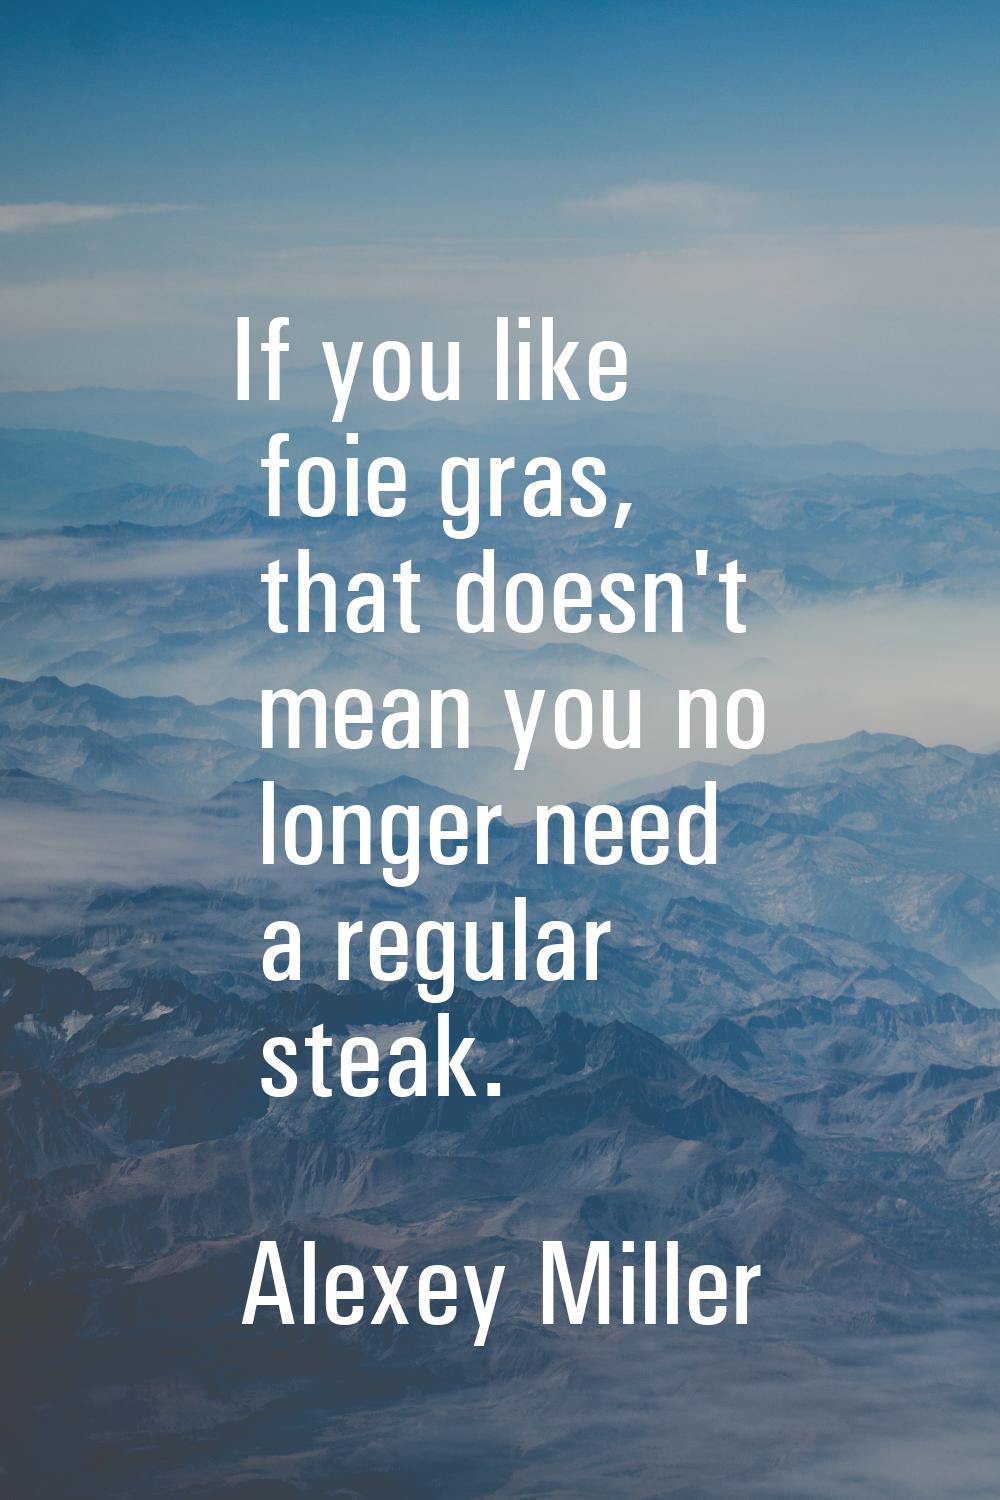 If you like foie gras, that doesn't mean you no longer need a regular steak.